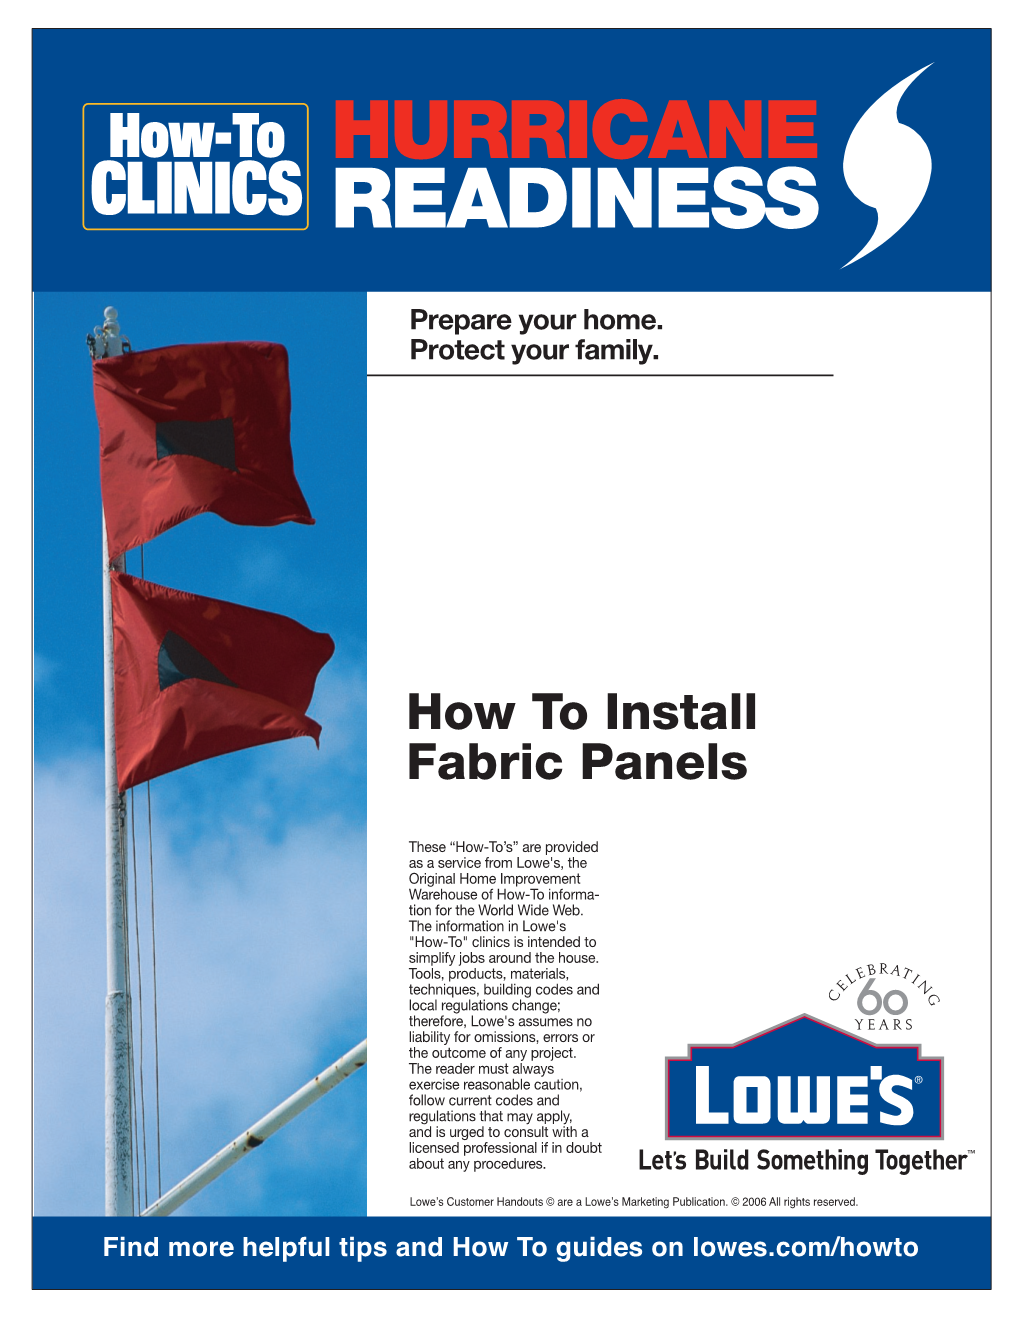 How to Install Fabric Panels